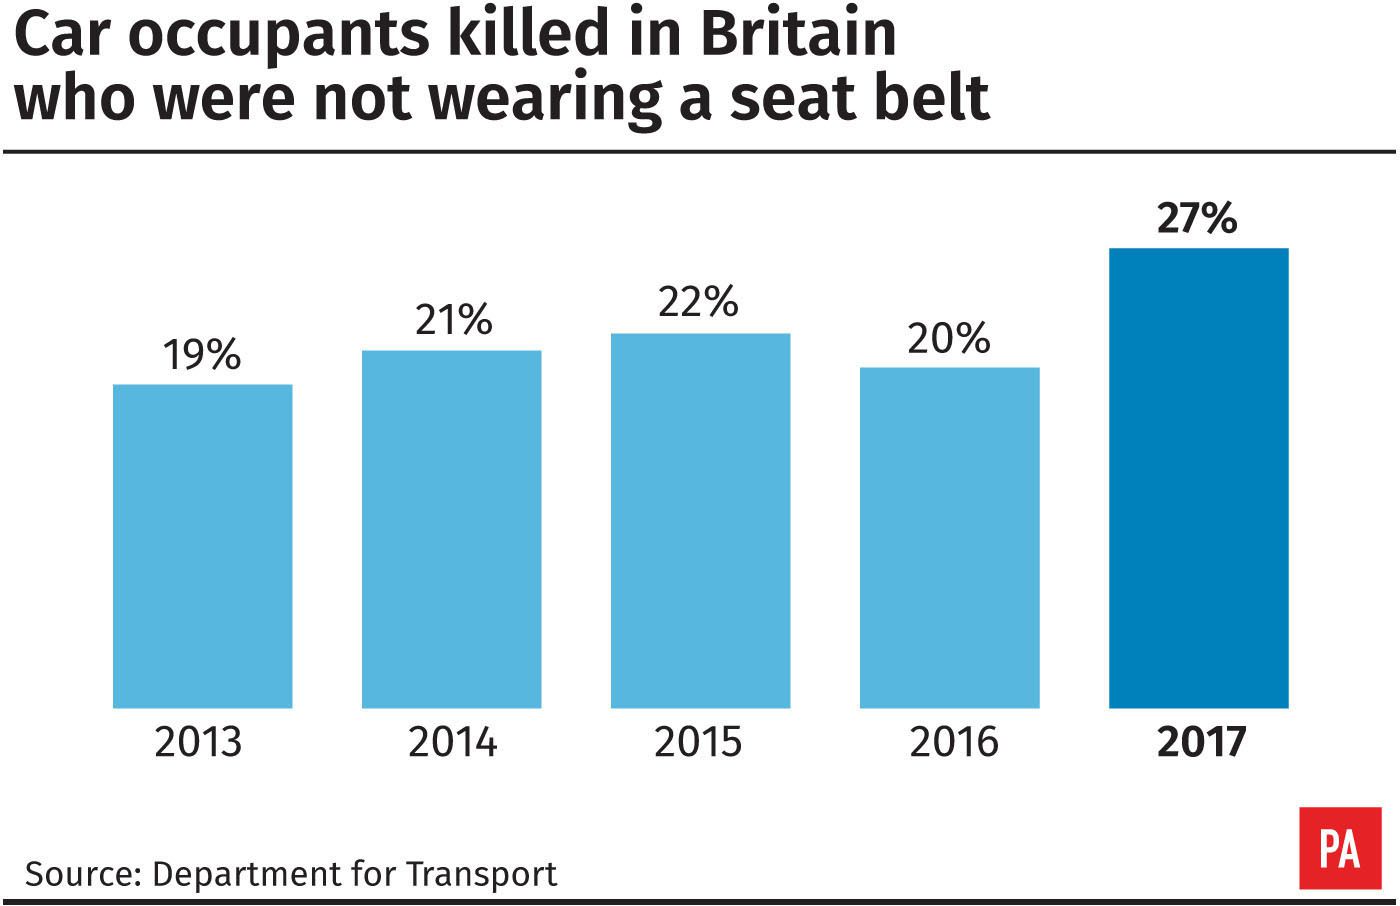 Graph showing car occupants killed in Britian who were not wearing a seatbelt